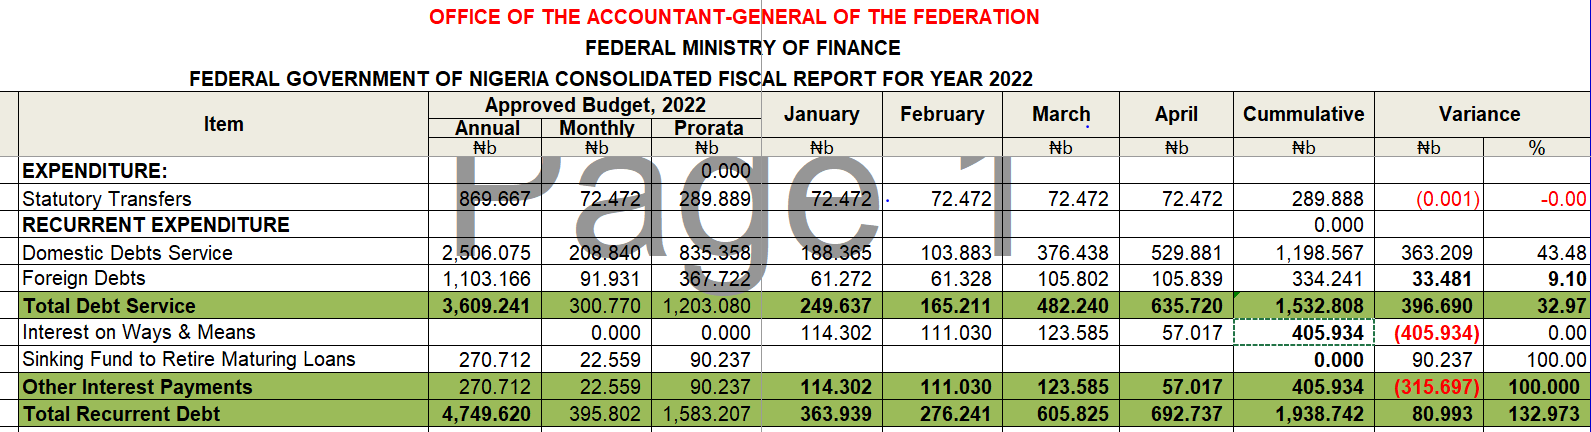 New Line Expenditure Increased FG Spending by N405.93 Billion in 4 Months